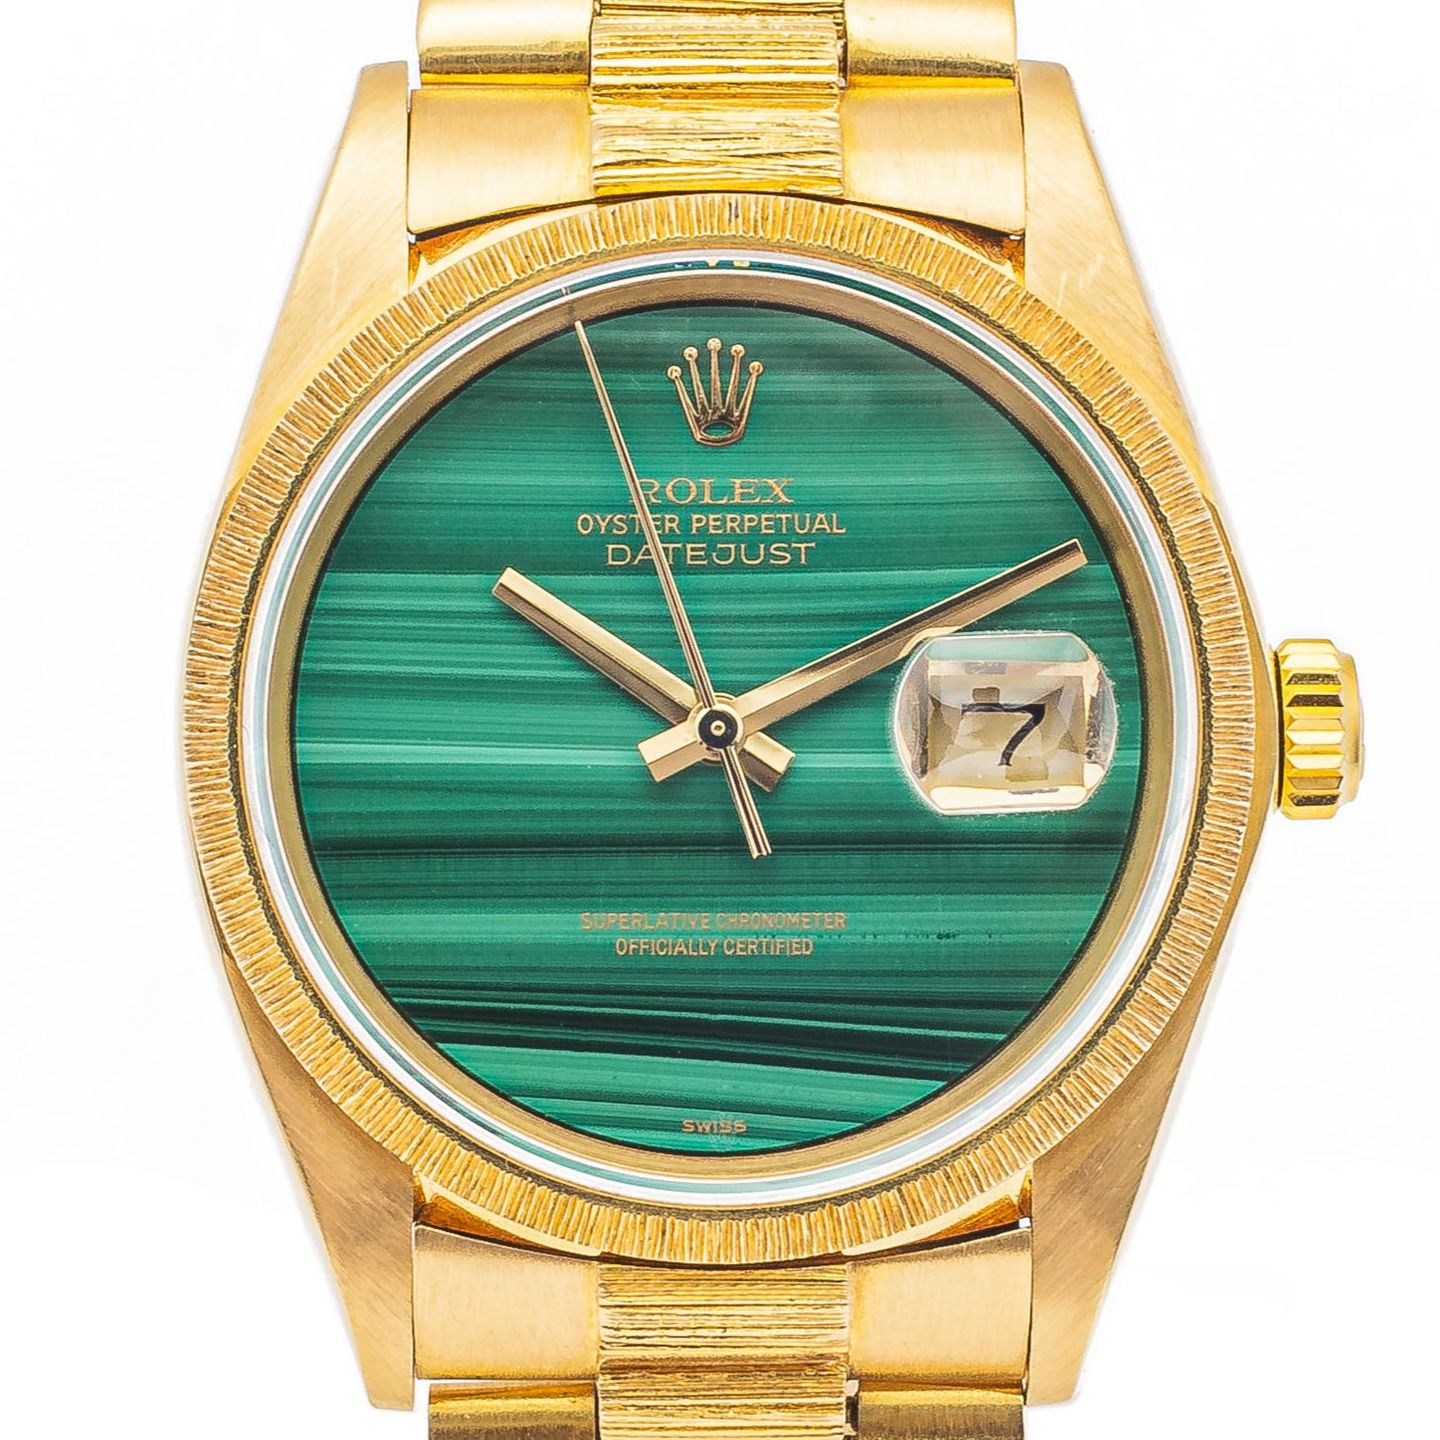 Rolex Datejust 36 1607 (1970) - Green dial 36 mm Yellow Gold case (1/5)